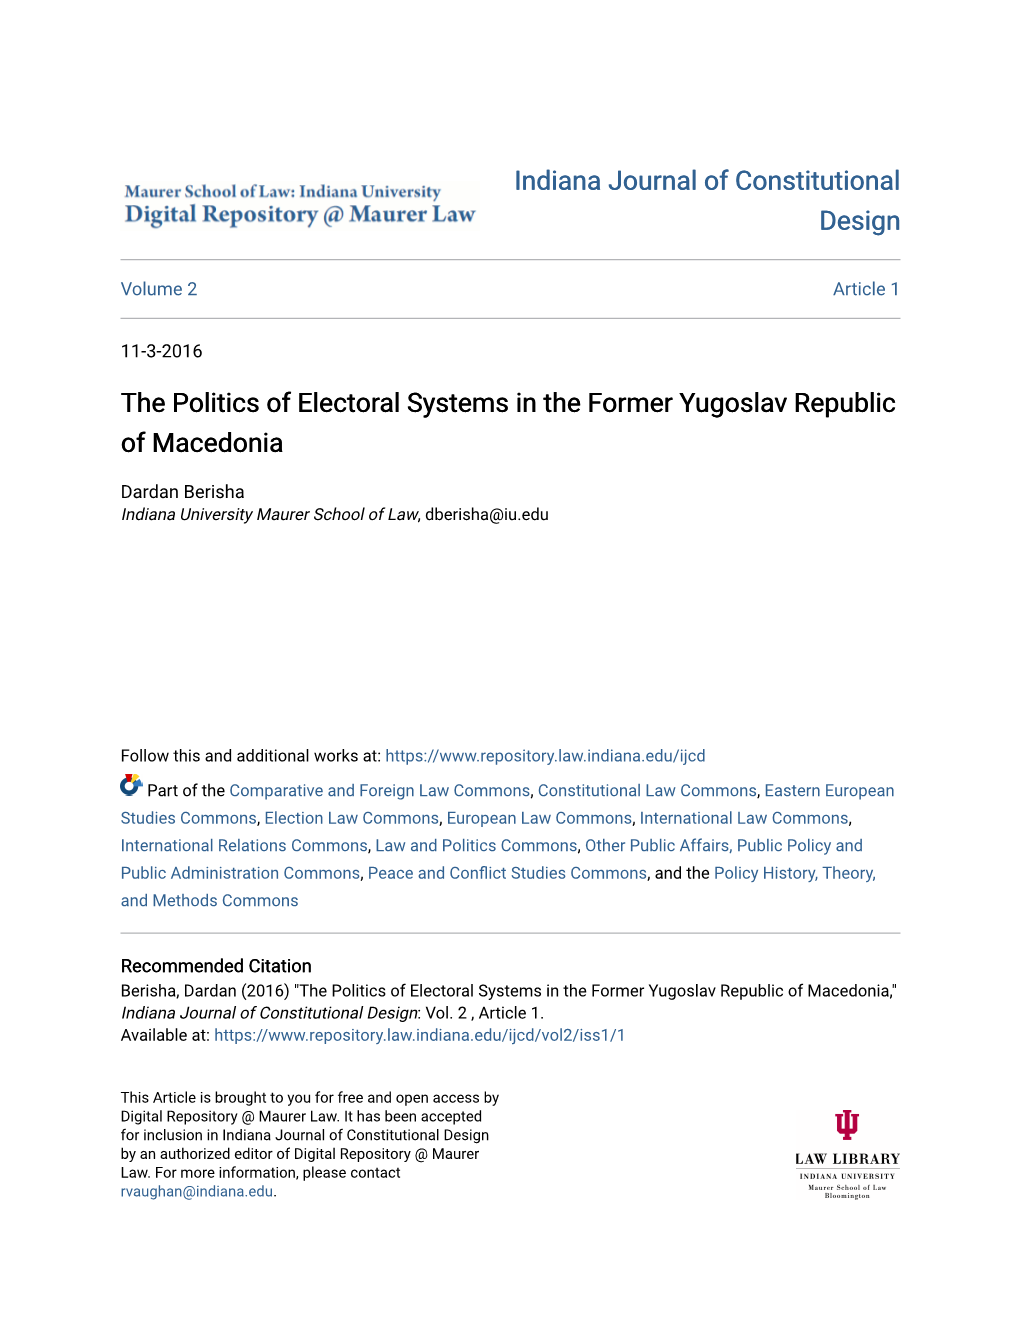 The Politics of Electoral Systems in the Former Yugoslav Republic of Macedonia